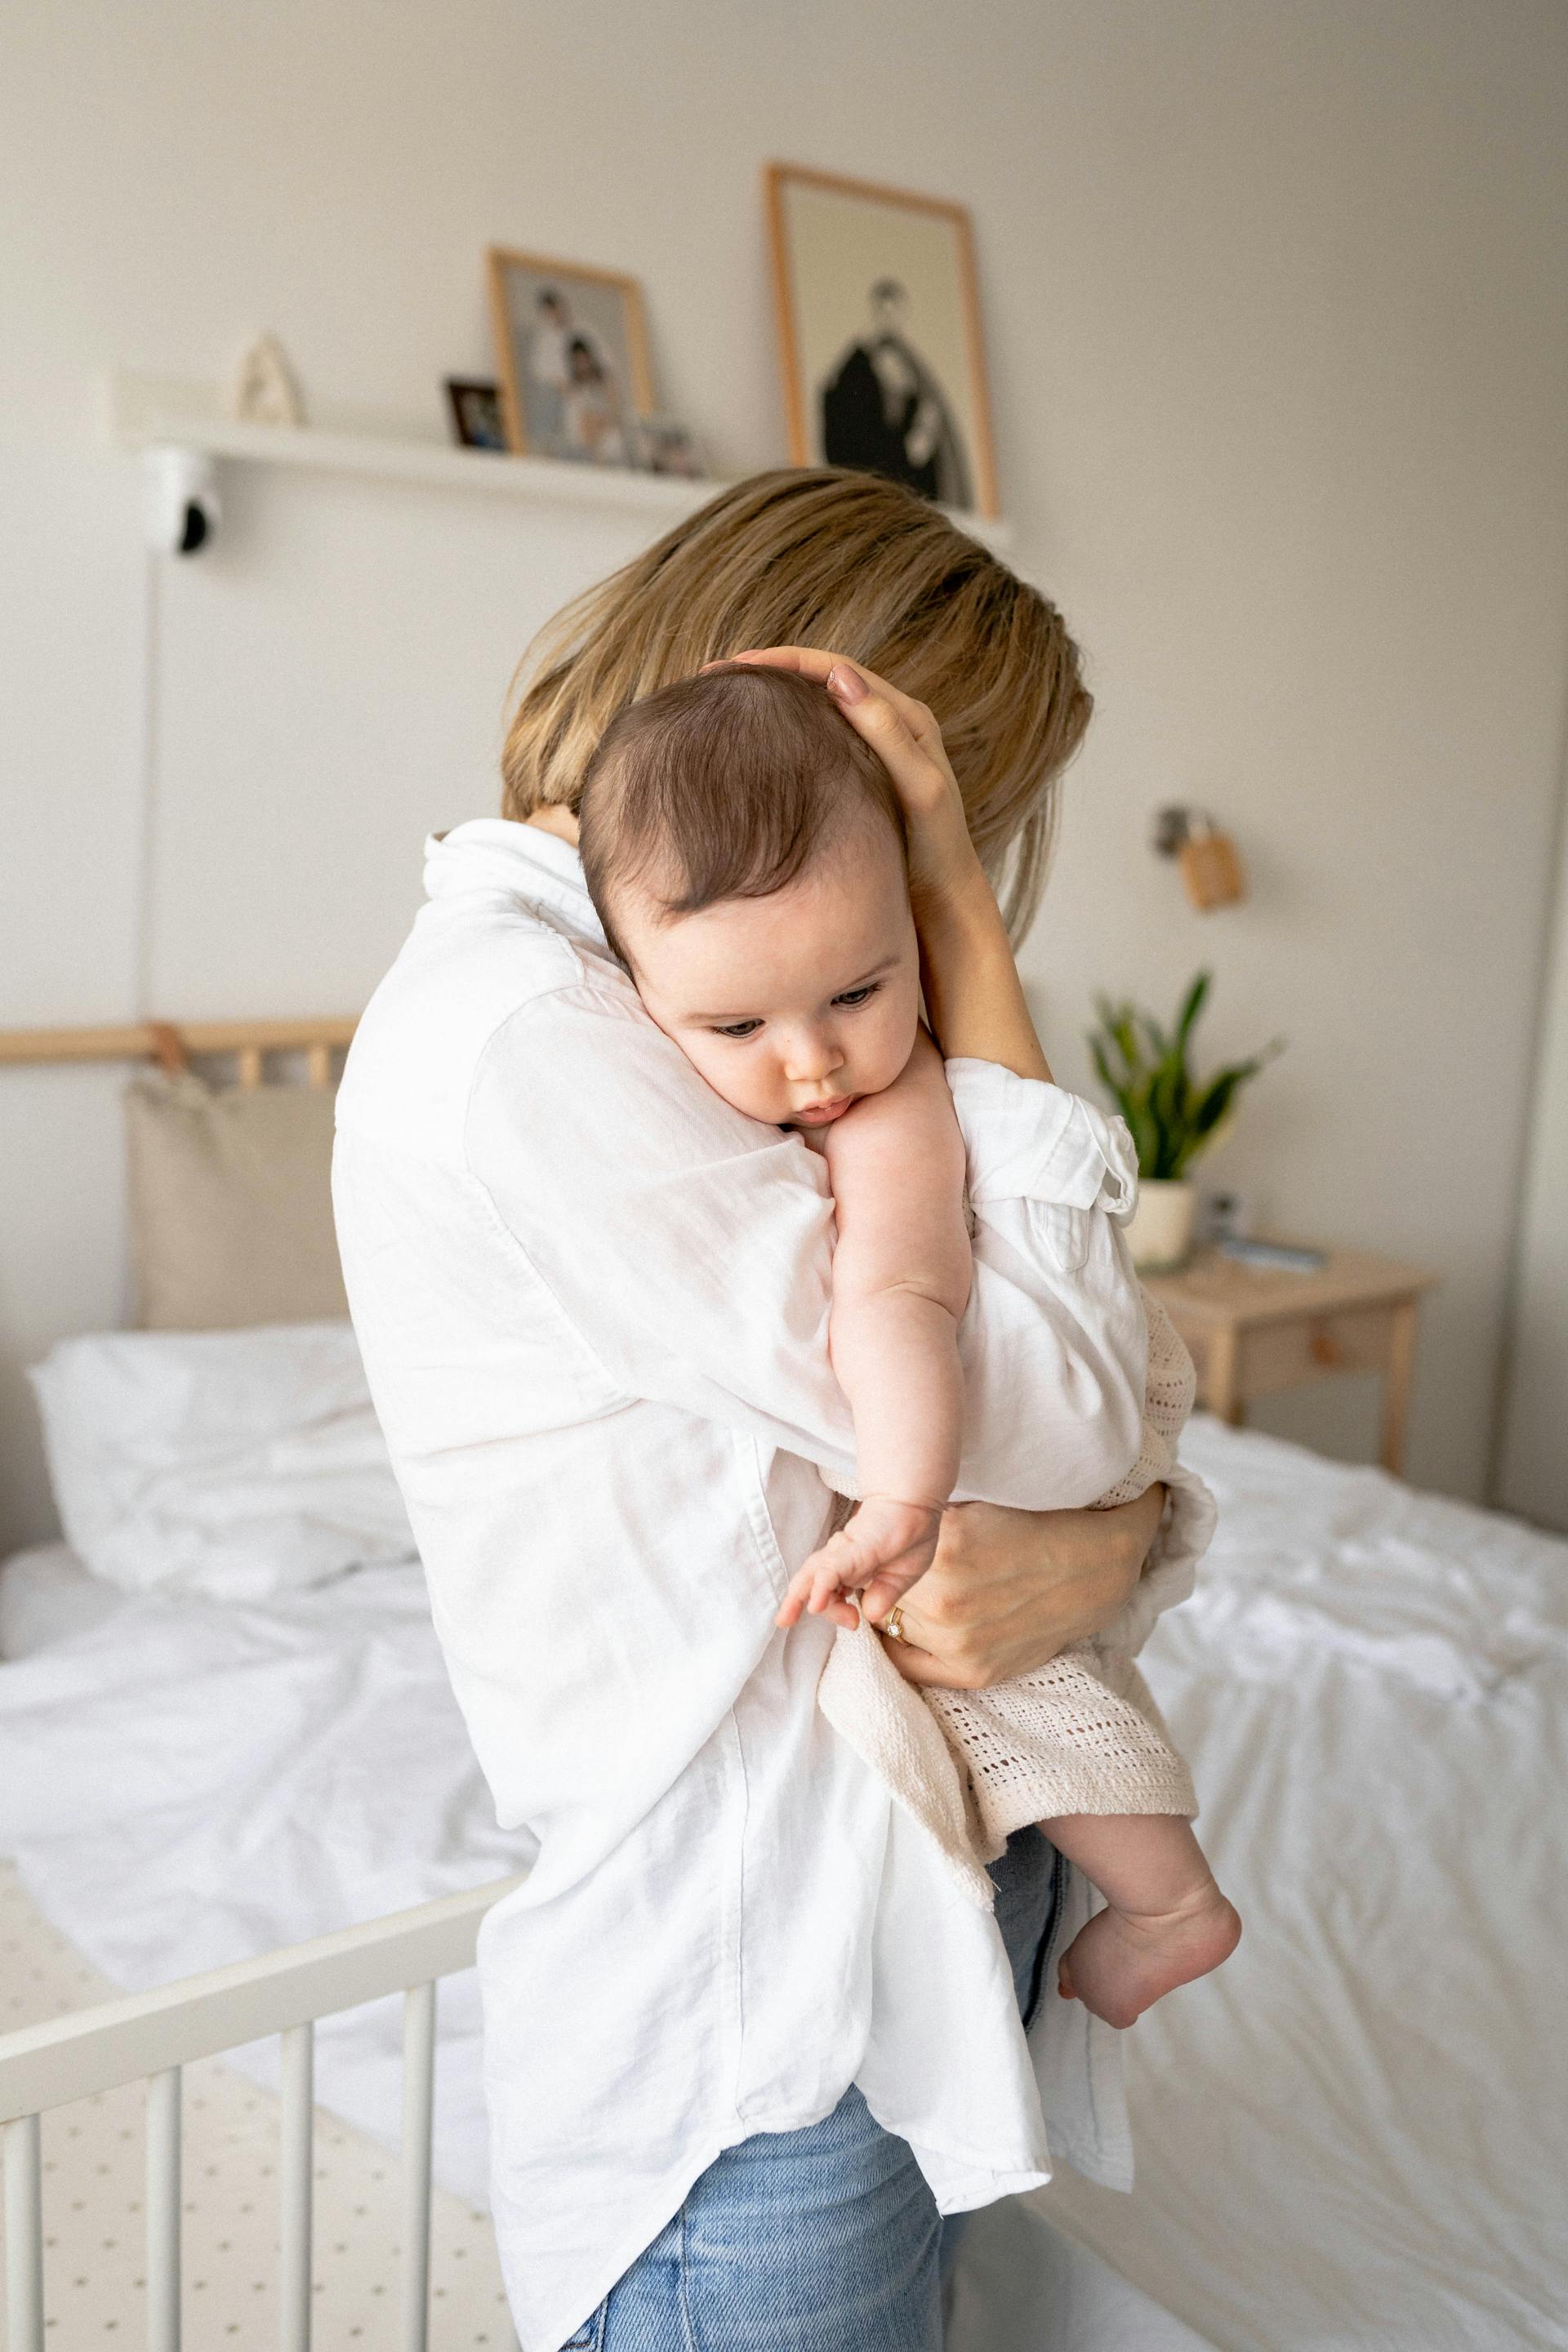 A mother embracing her baby | Source: Pexels